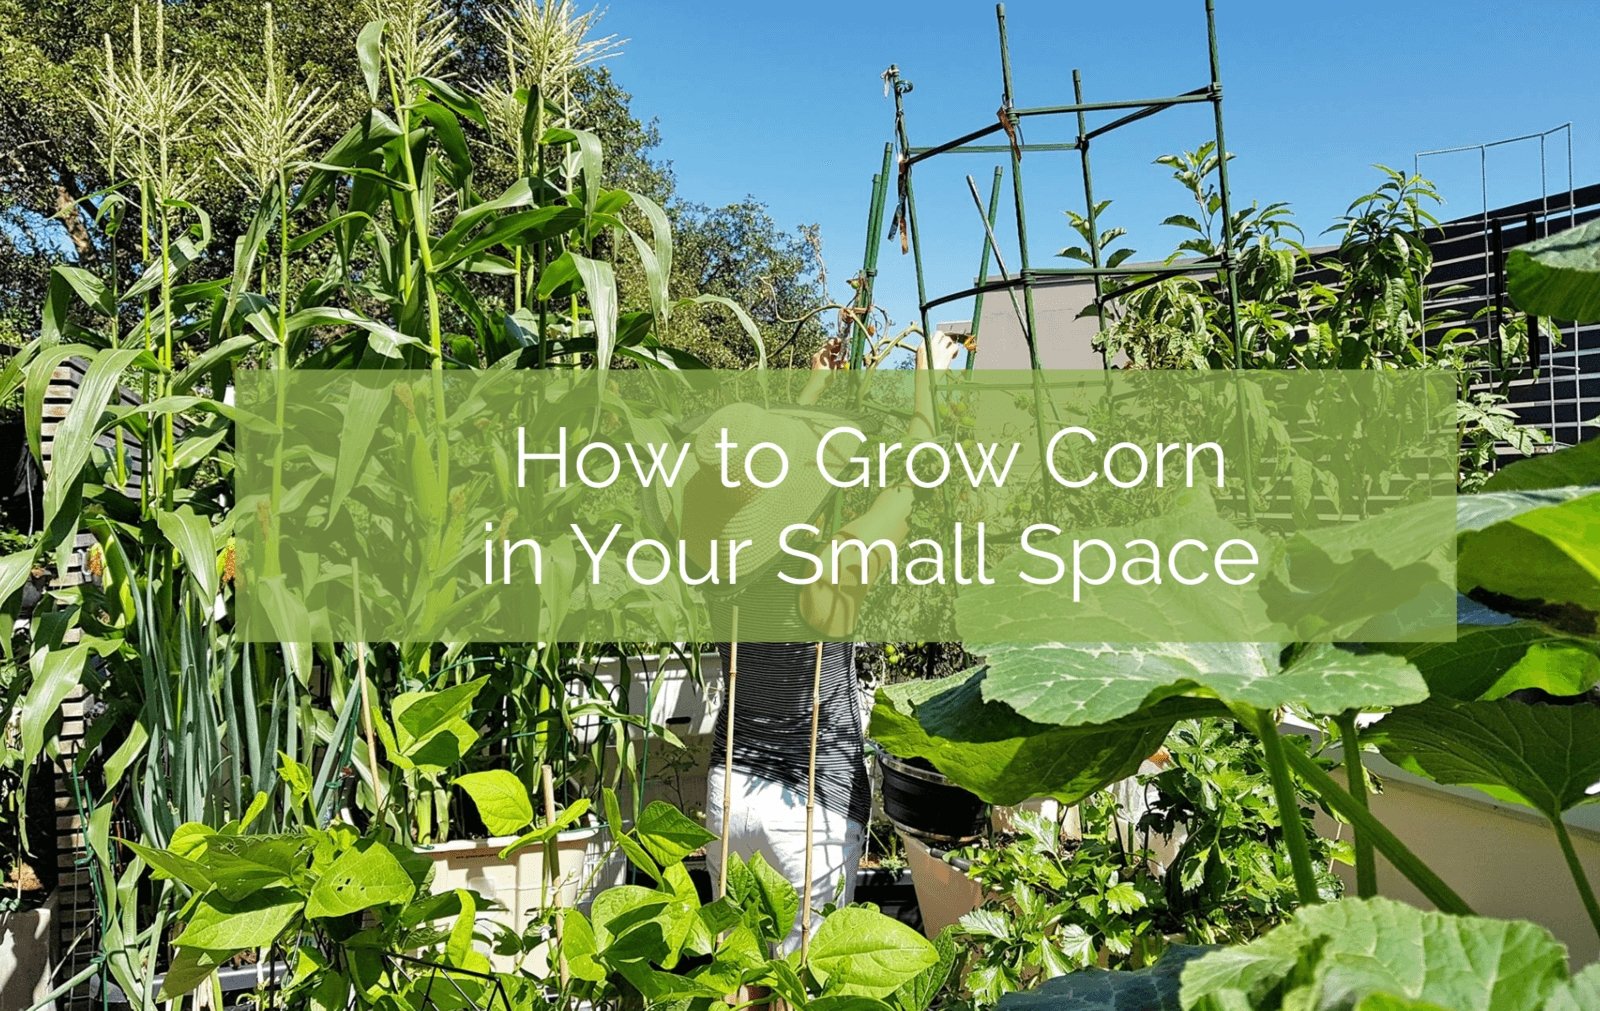 How to Grow Corn in Backyard Gardens In Pots Containers  Raised Beds  from Seed AlboPeppercom